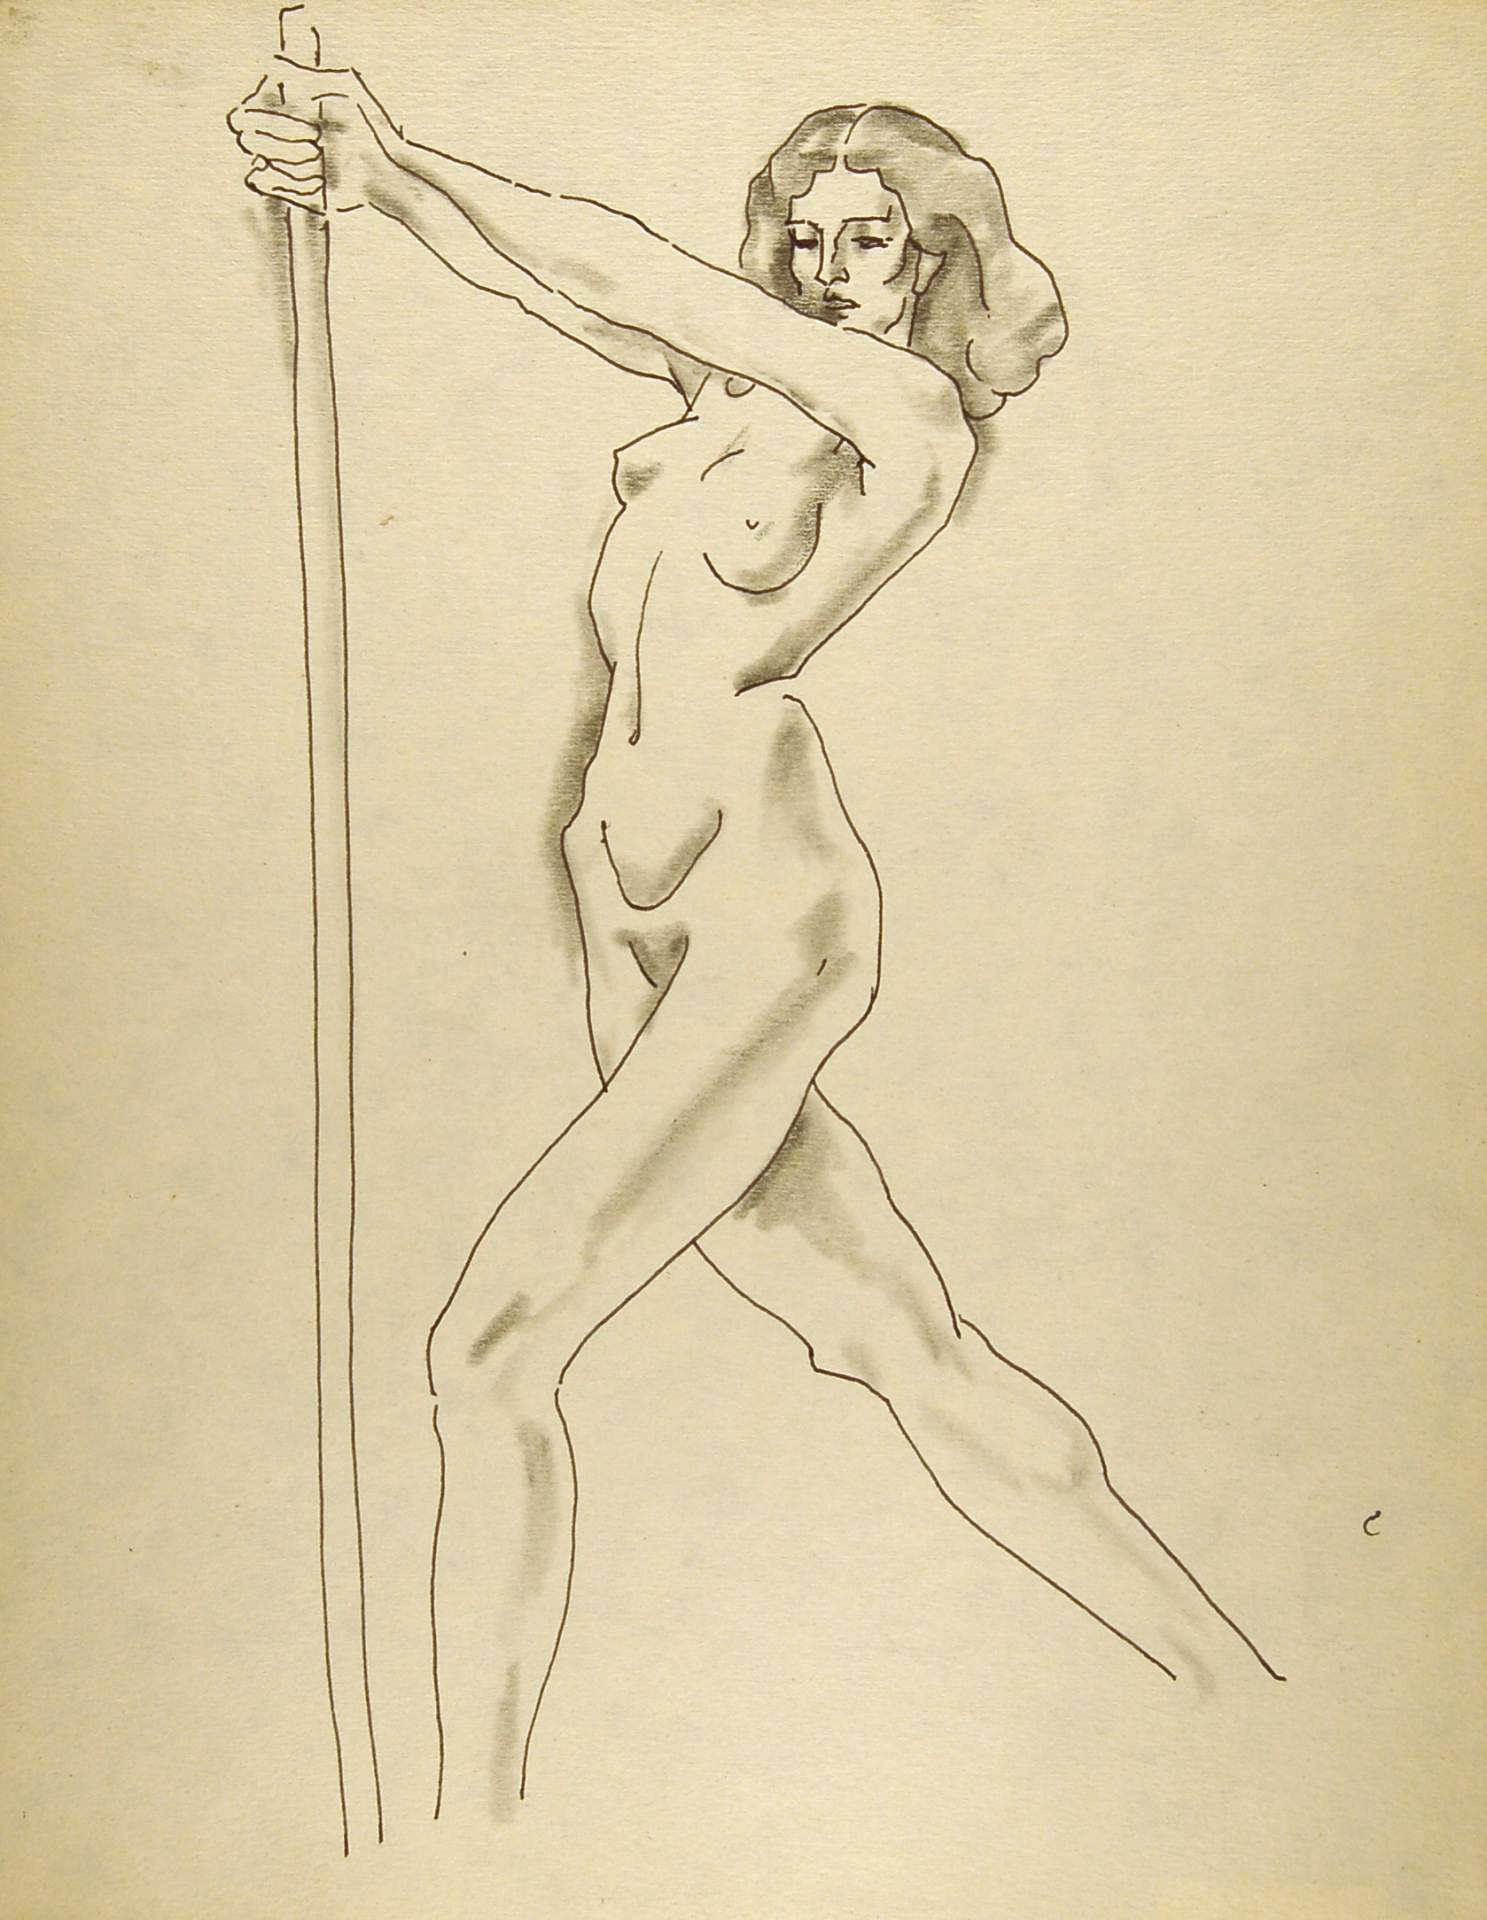 Striding Female Nude with Pole